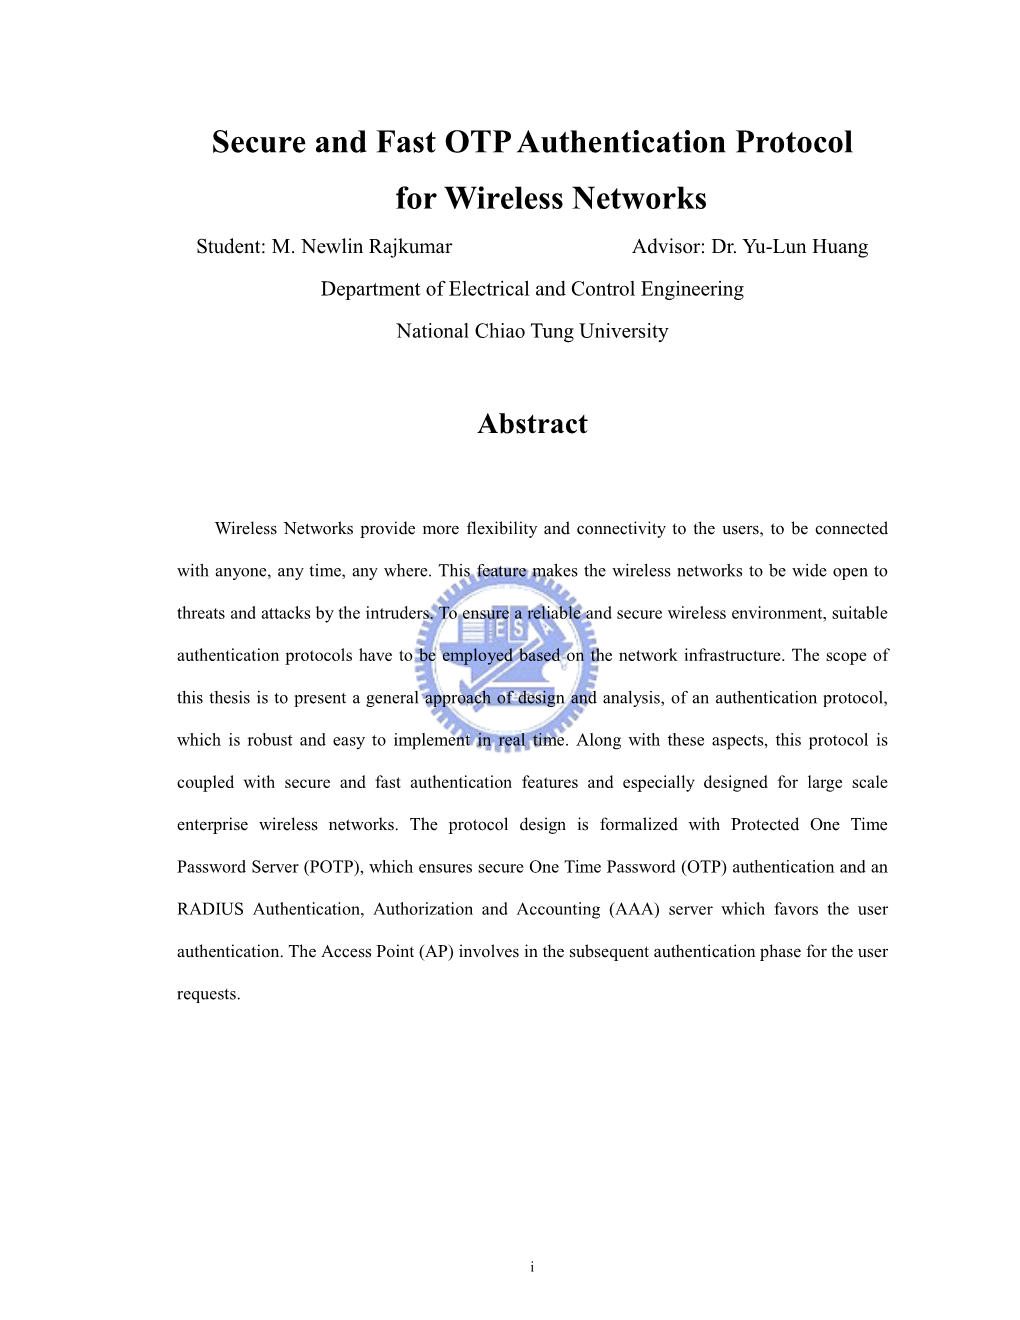 Secure and Fast OTP Authentication Protocol for Wireless Networks Student: M